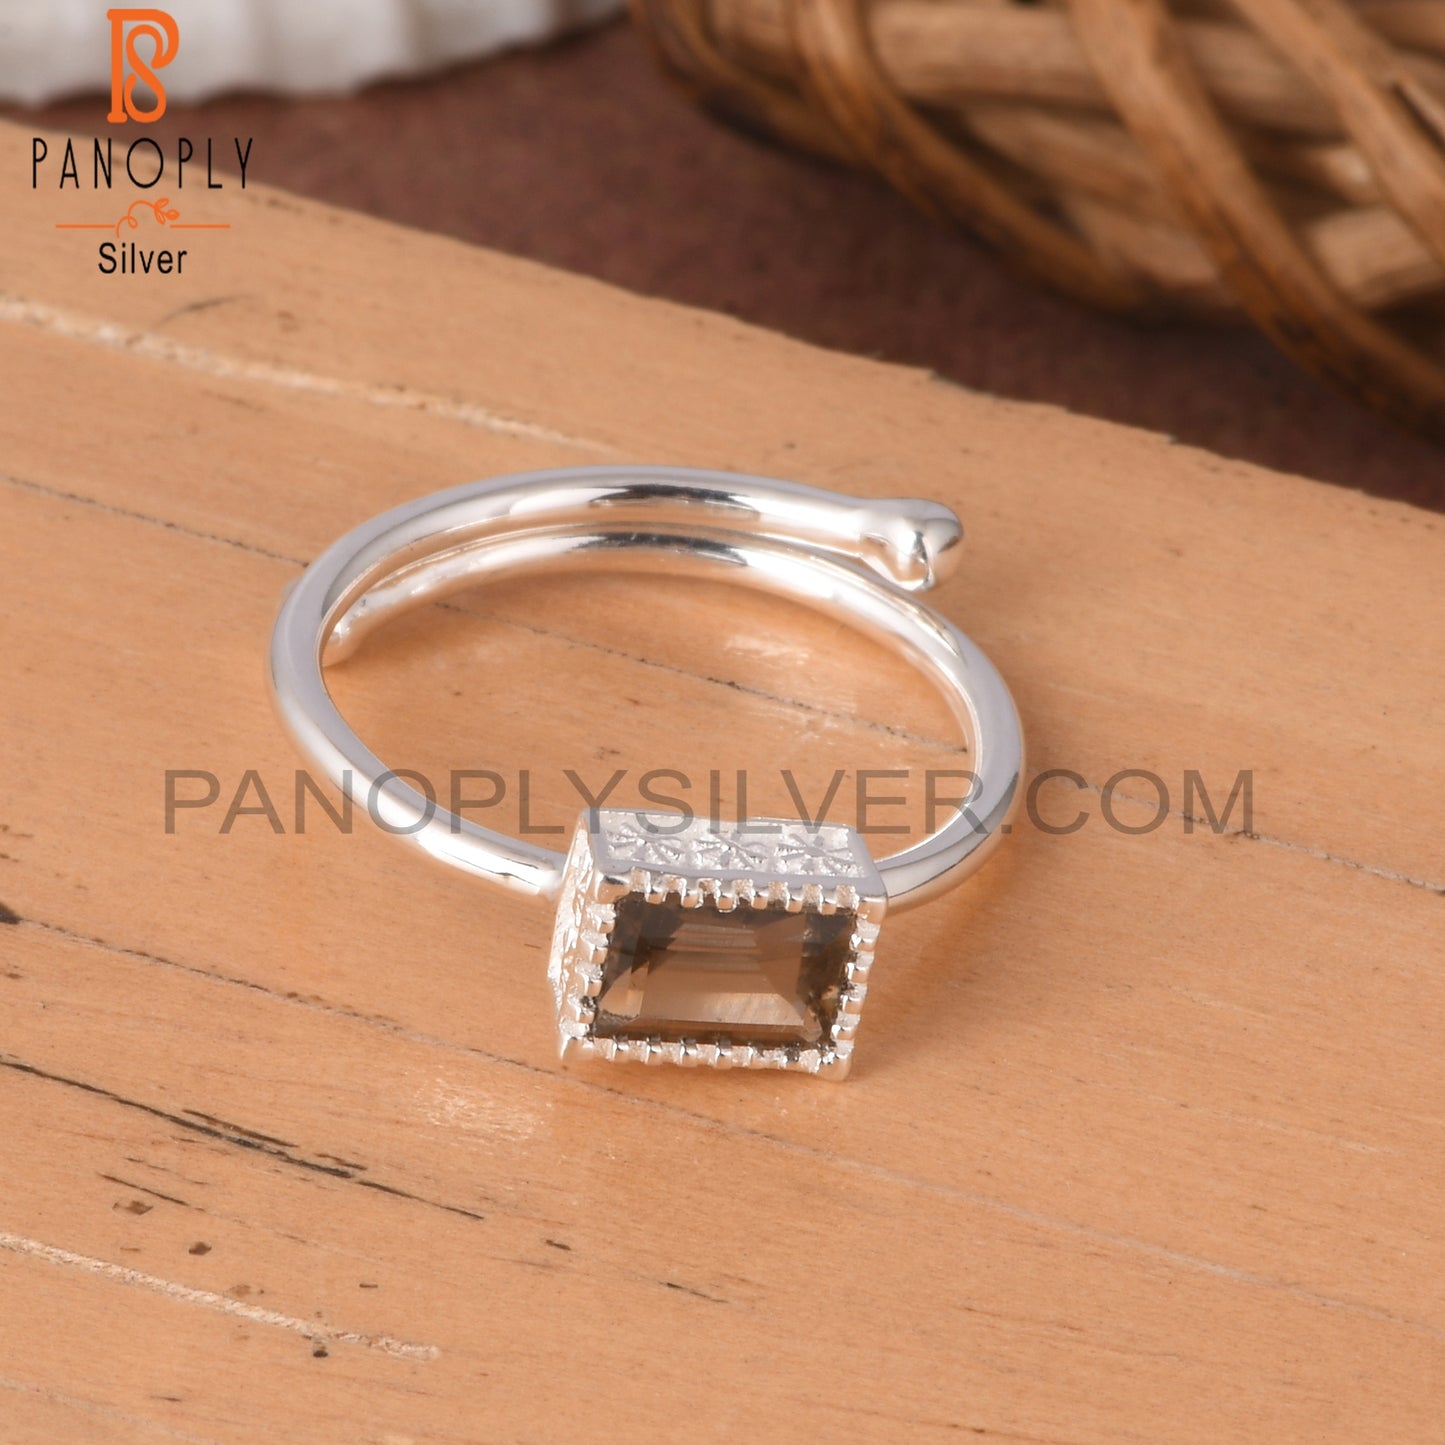 Smoky Baguette Shape 925 Sterling Silver Ring